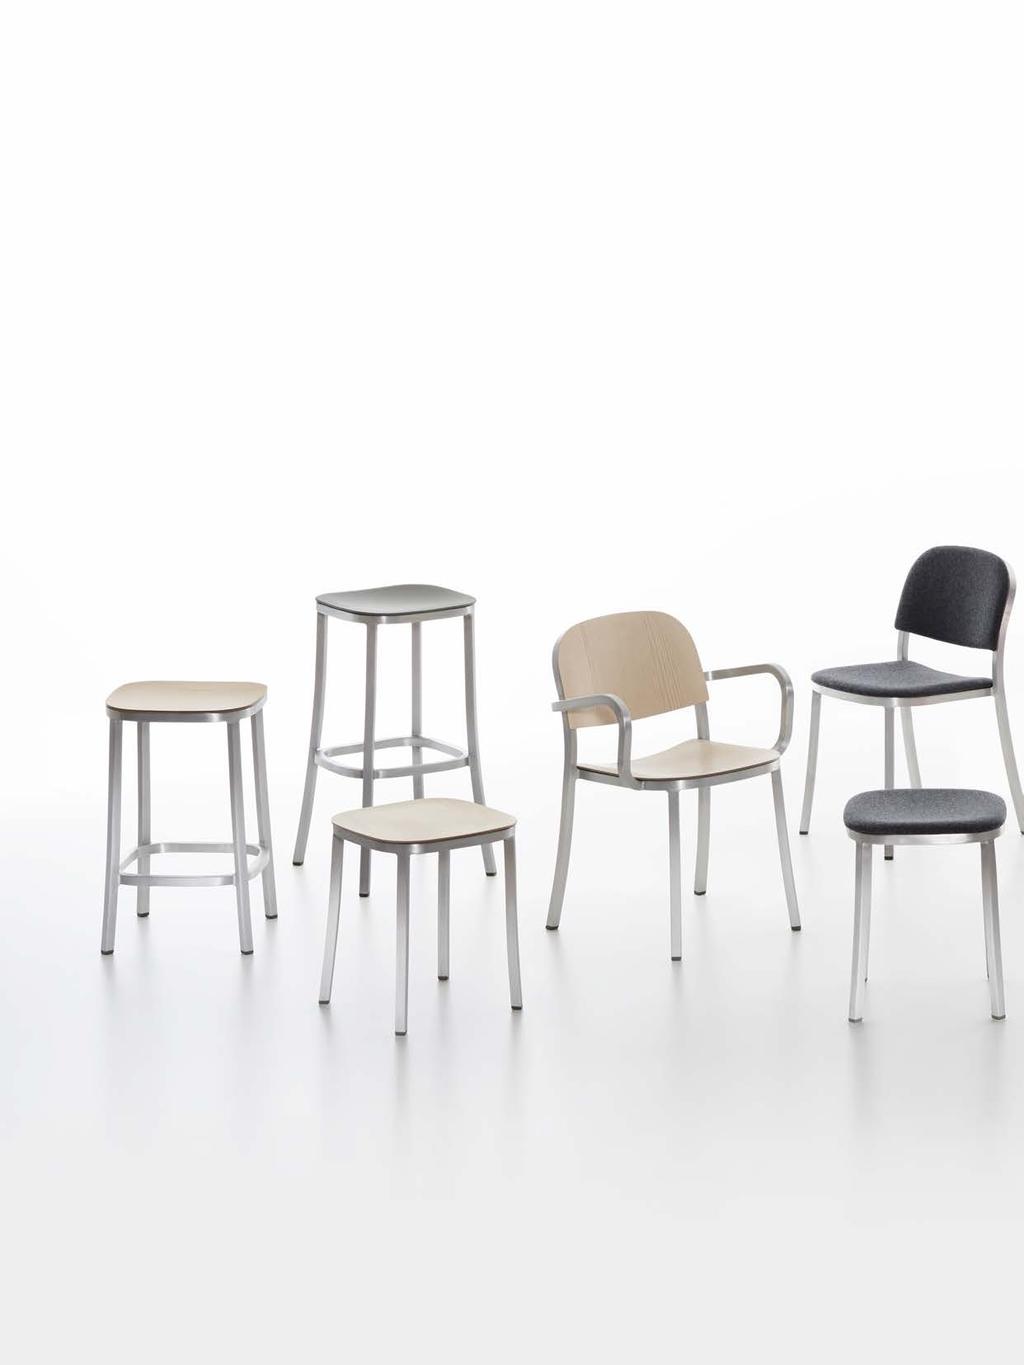 The 1 Inch family of seats features a chair, armchair and stools in three heights.